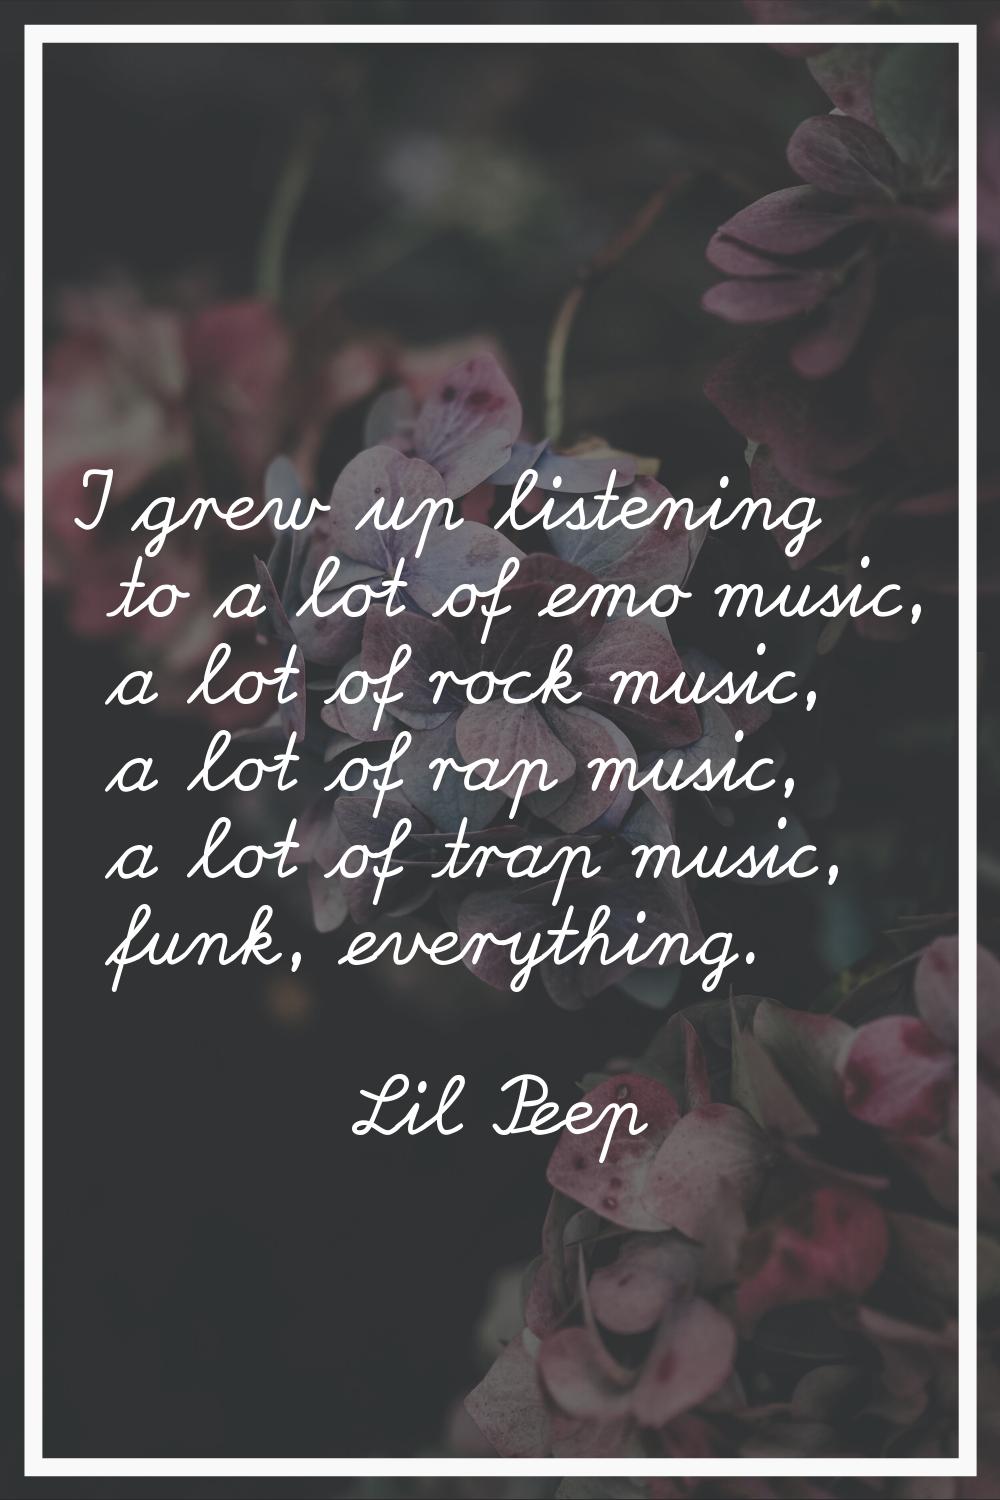 I grew up listening to a lot of emo music, a lot of rock music, a lot of rap music, a lot of trap m